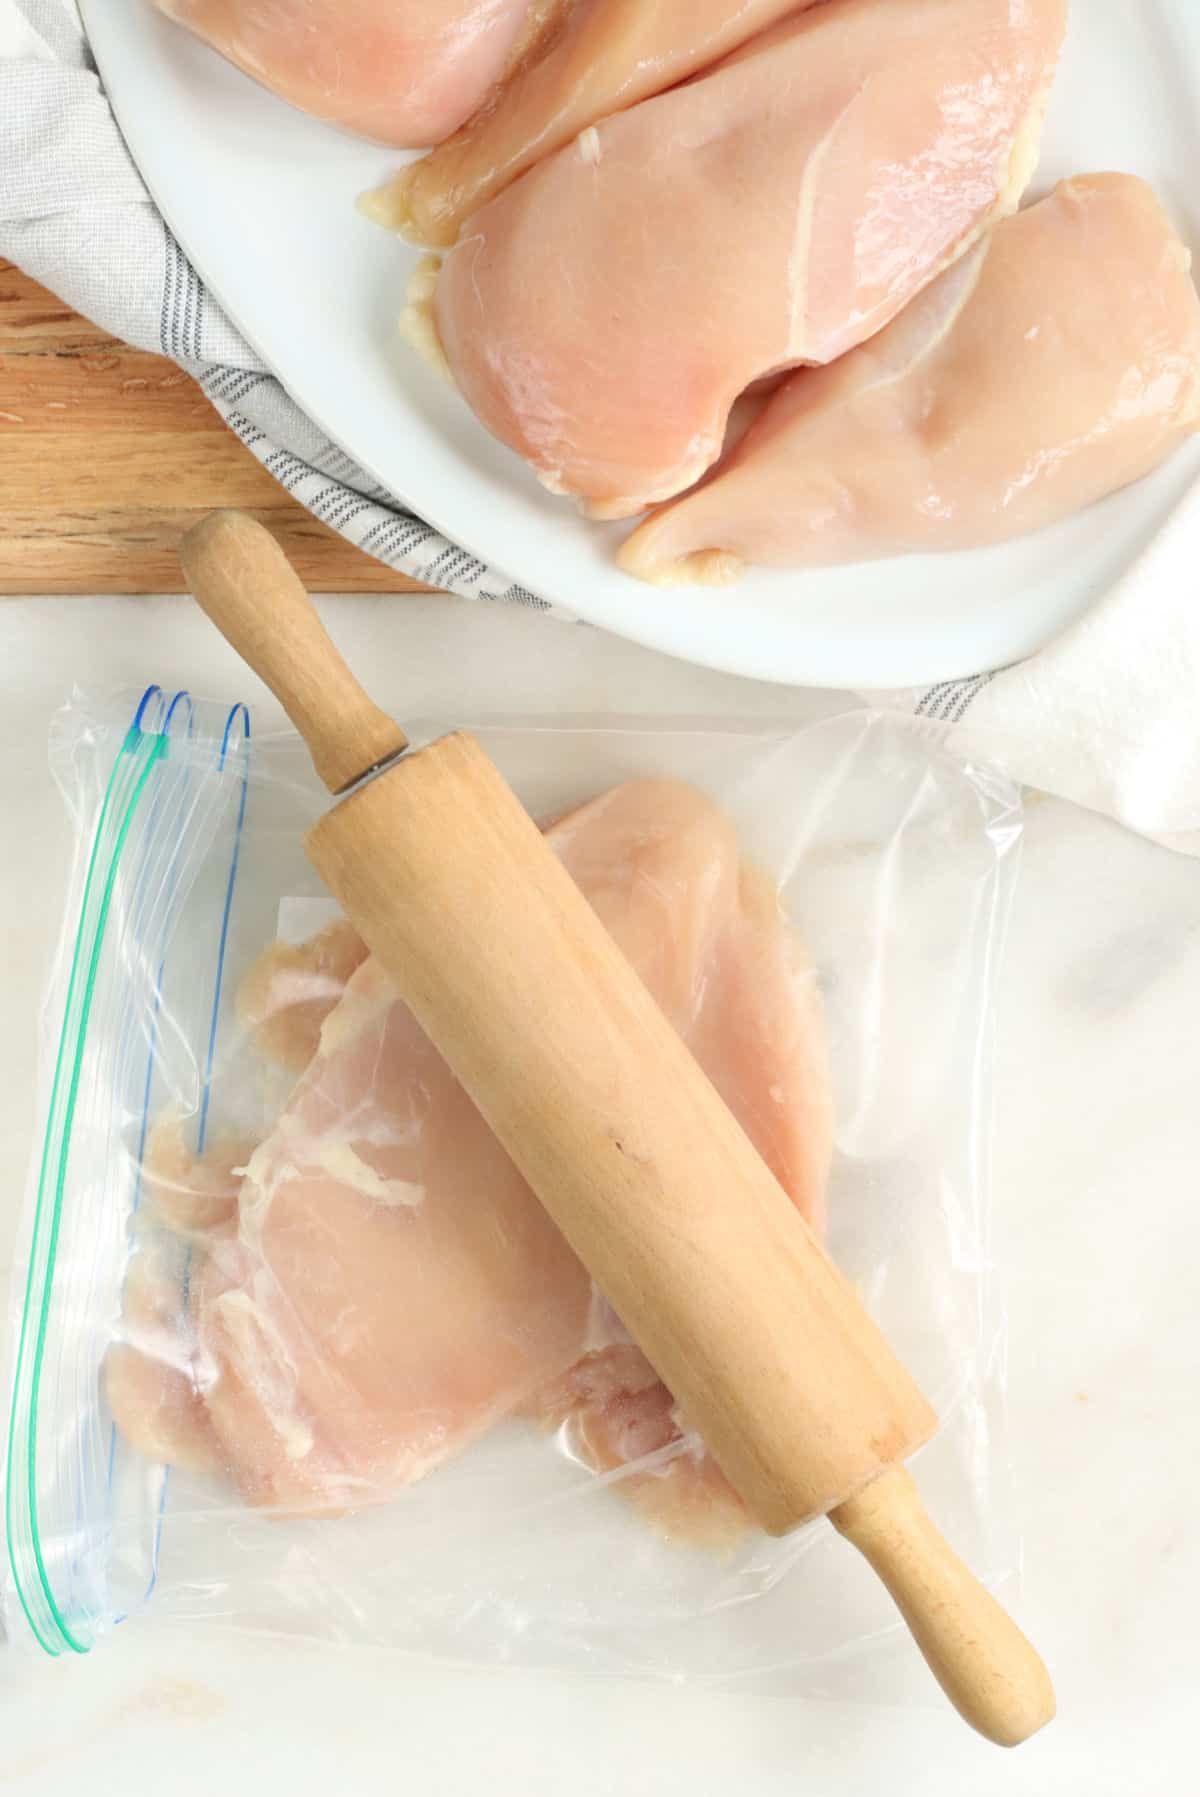 Chicken breast flattened in zip-style bag, small wooden rolling pin on white marble.